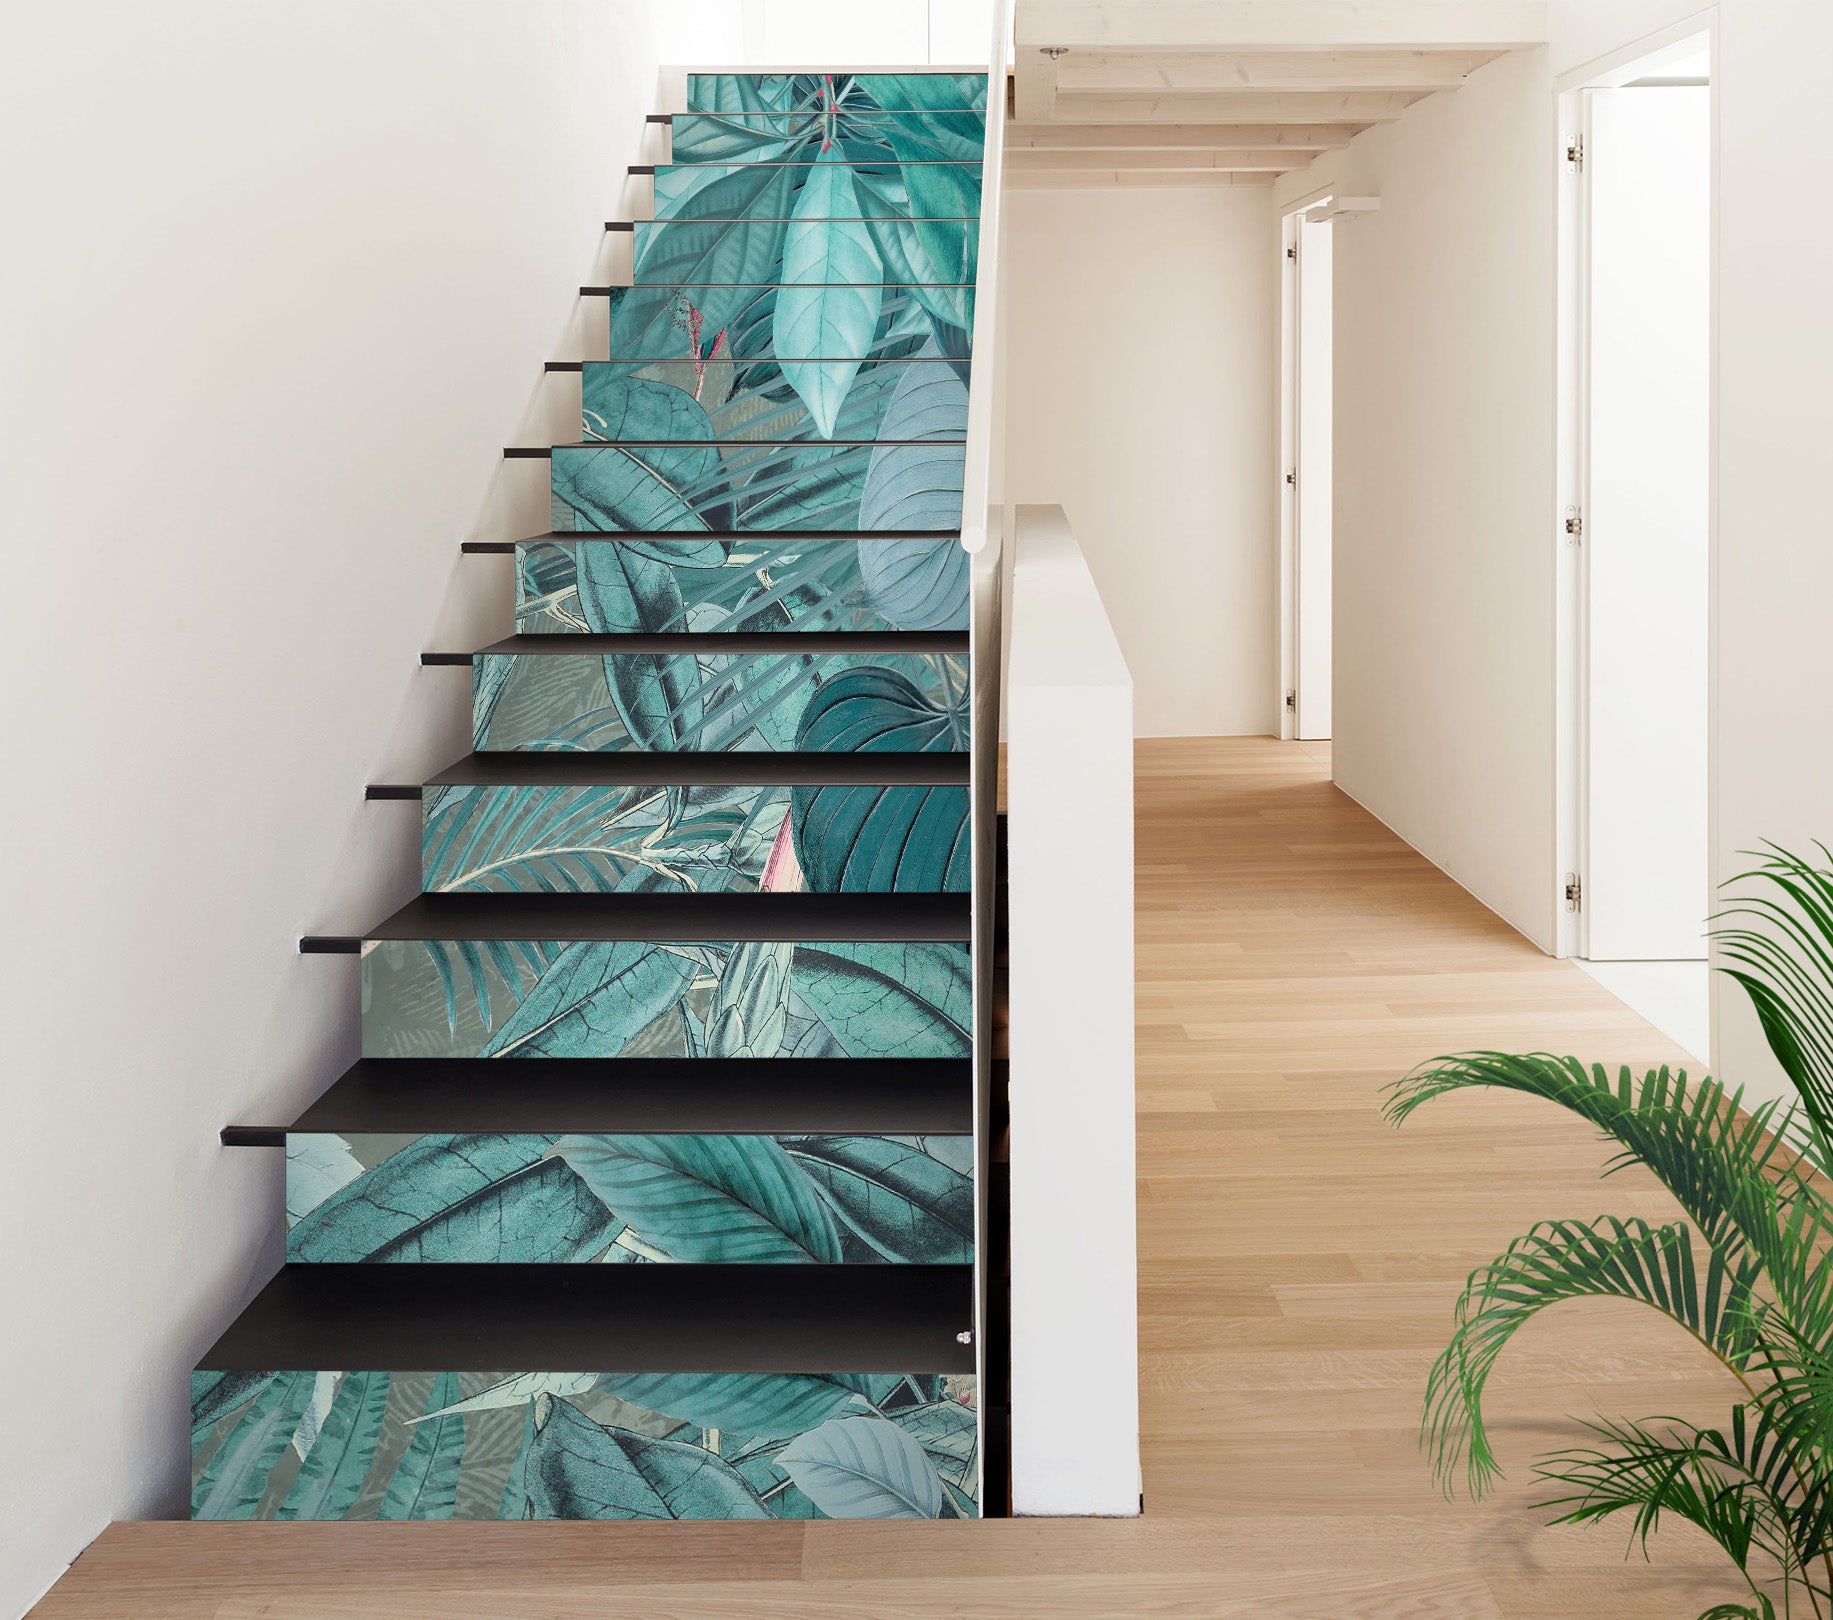 3D Jungle Grove 109227 Andrea Haase Stair Risers